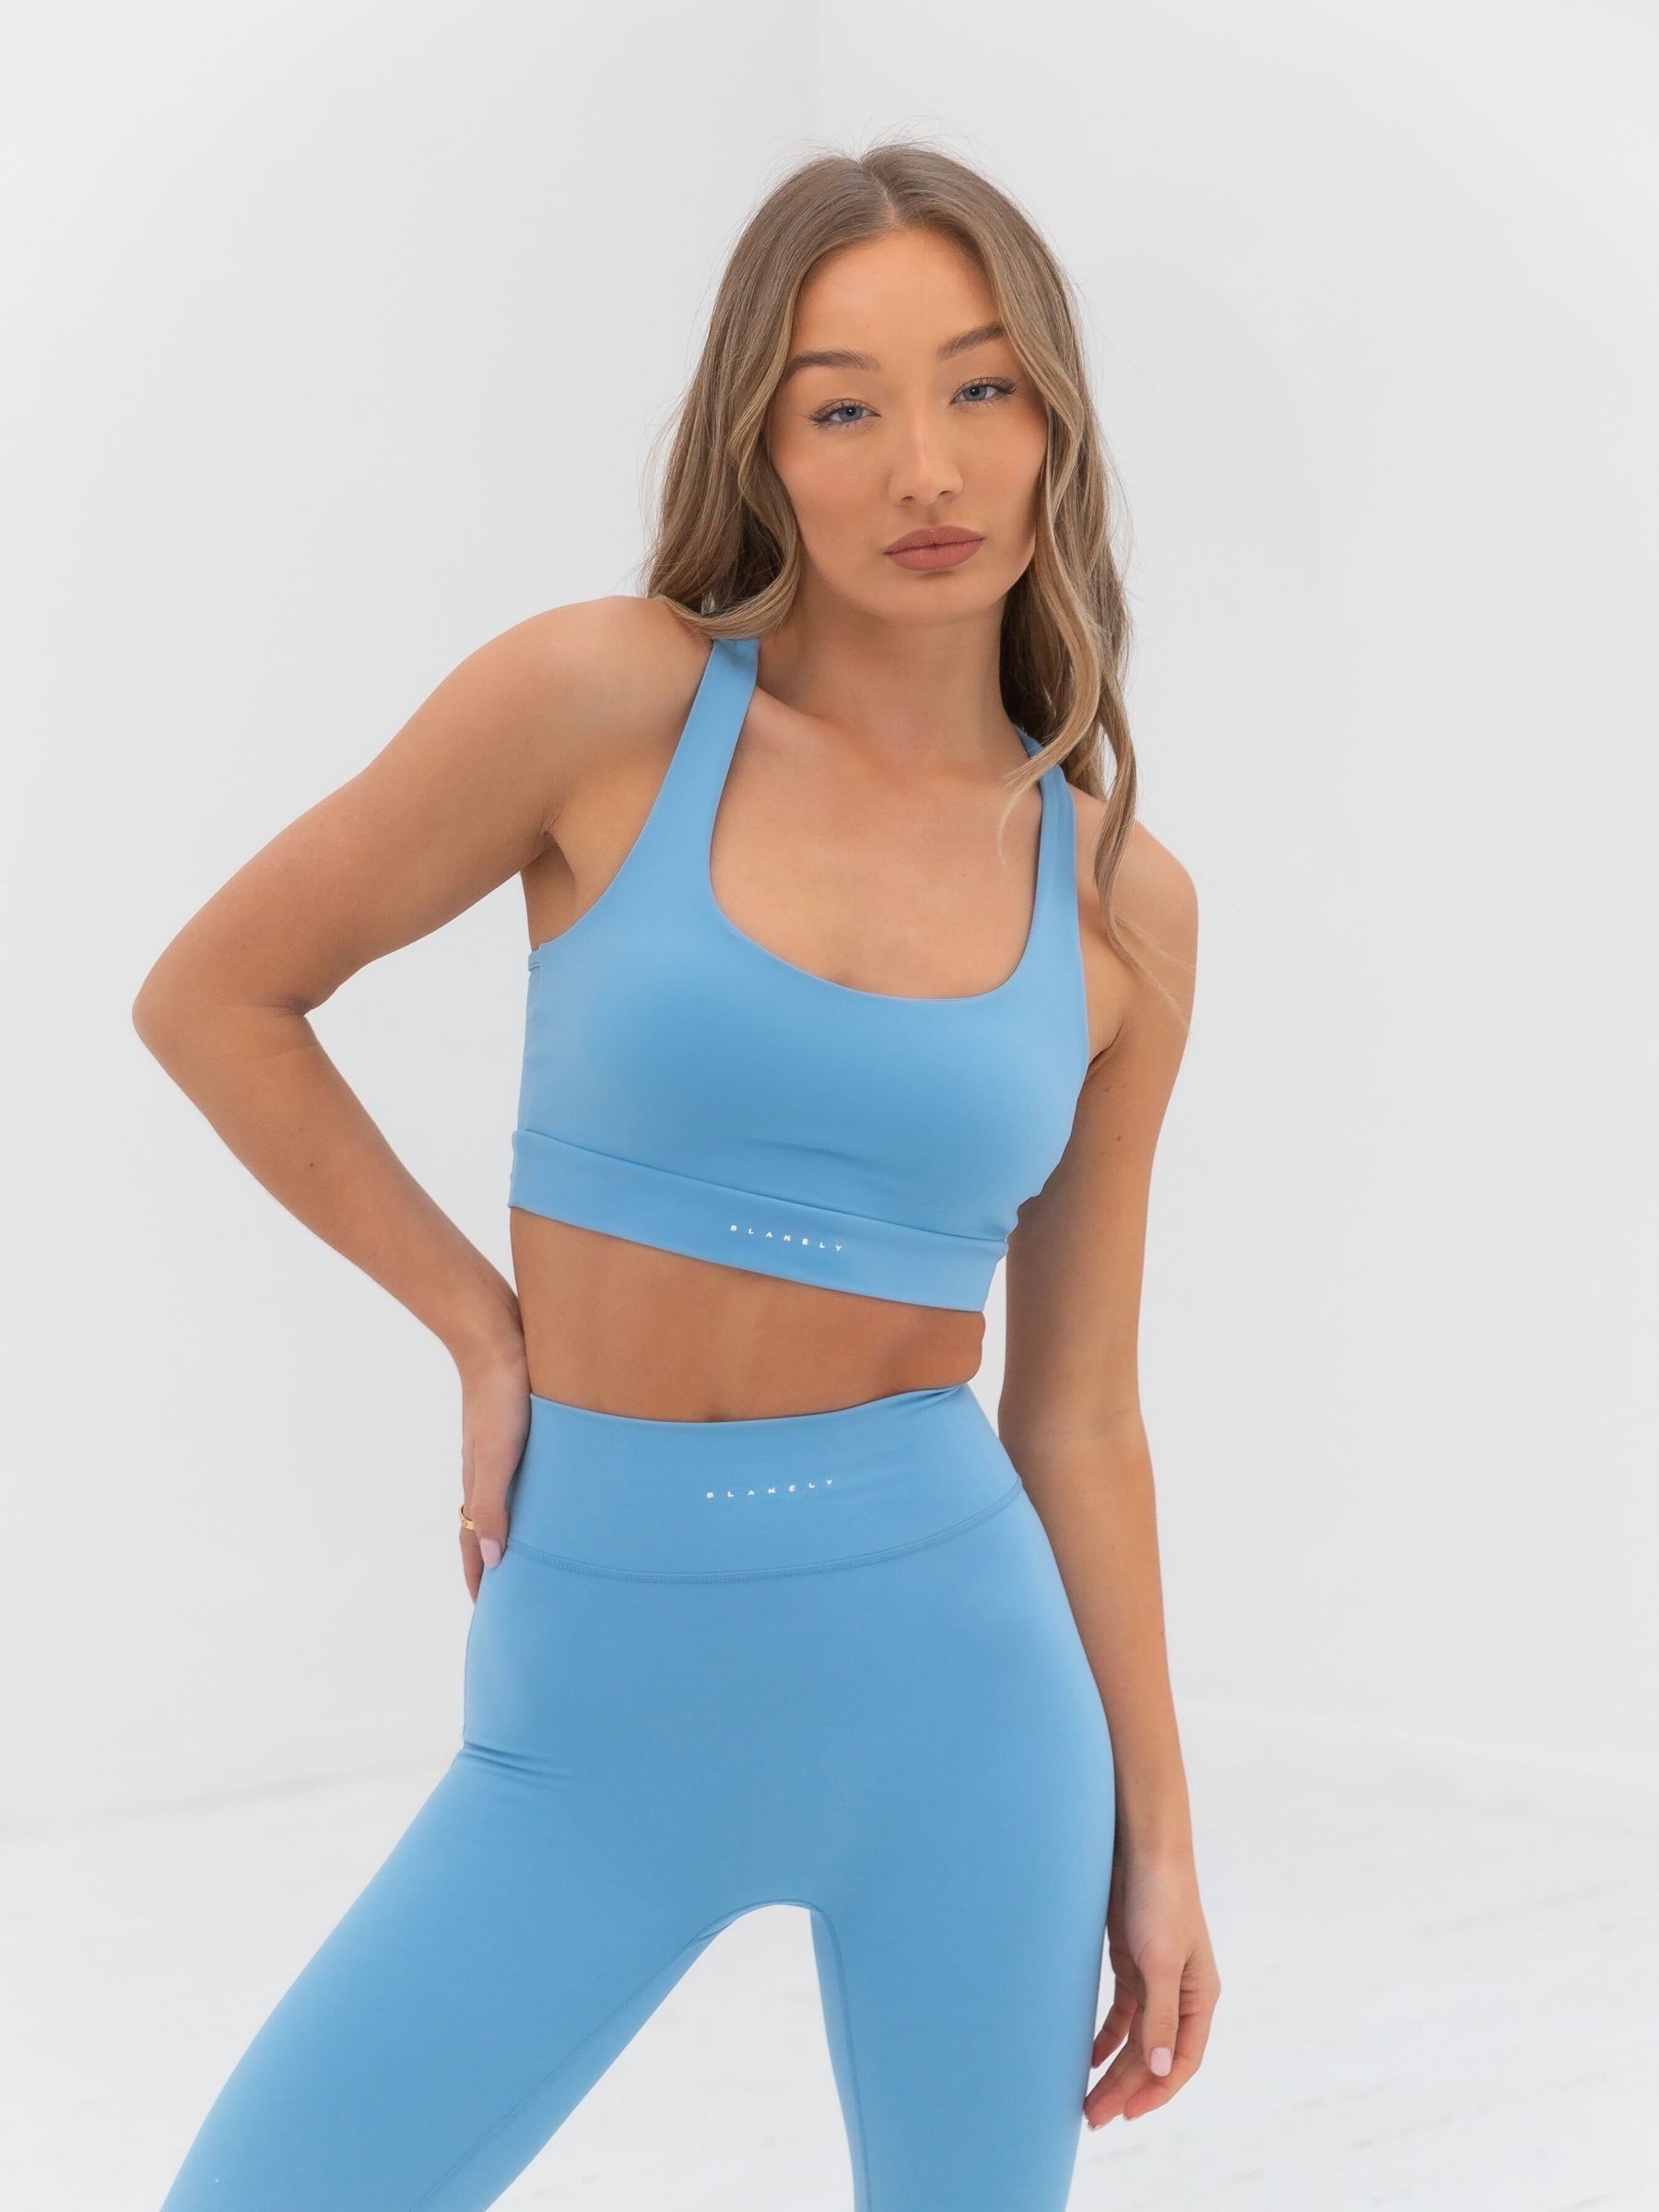 Blakely Clothing Womens Sports Bras Free USA Shipping Over $199 – Blakely  Clothing US